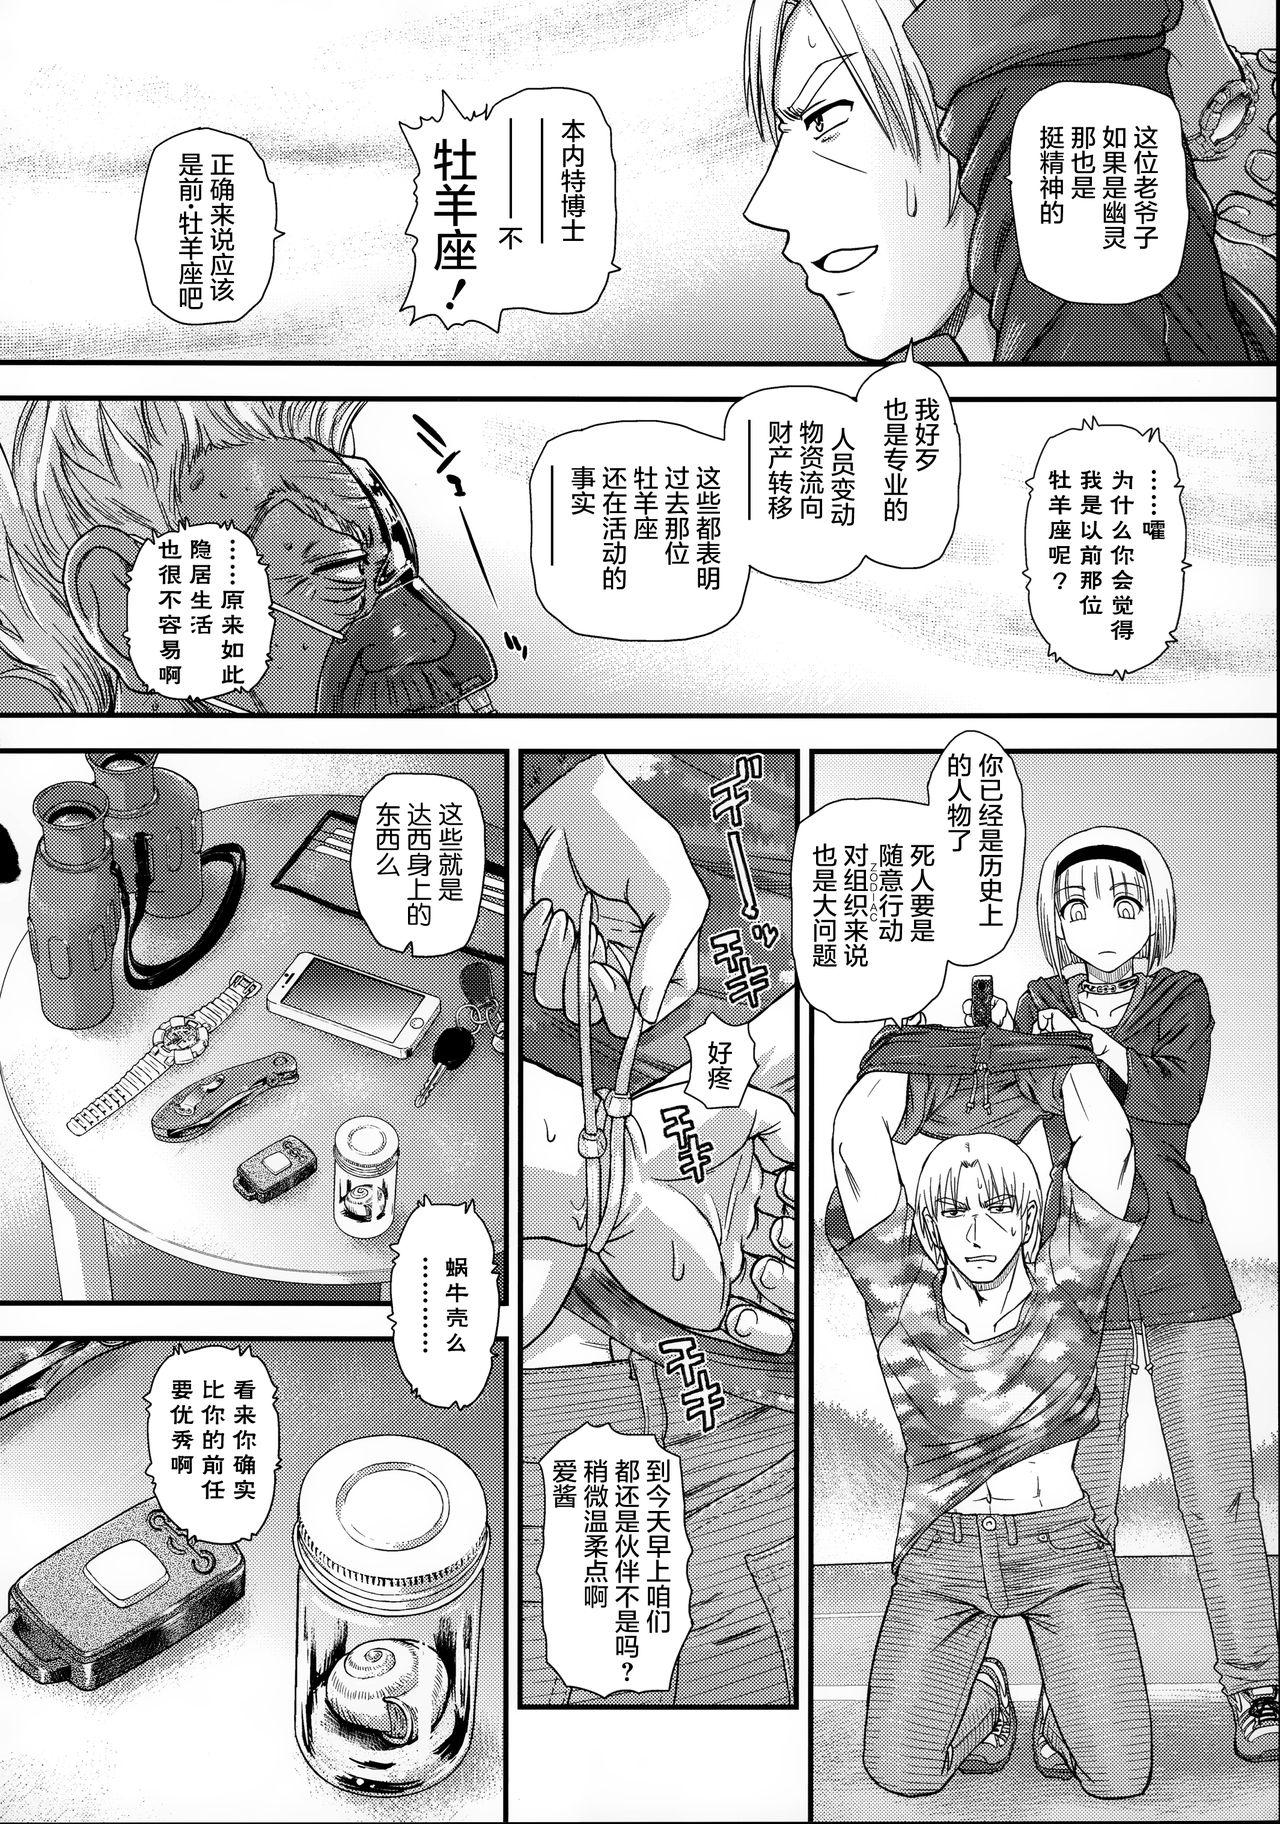 Big breasts (C95) [Behind Moon (Dulce-Q)] DR:II ep.7 ~Dulce Report~ | 达西报告II Ep.7 [Chinese] [鬼畜王汉化组] - Original Animated - Page 10